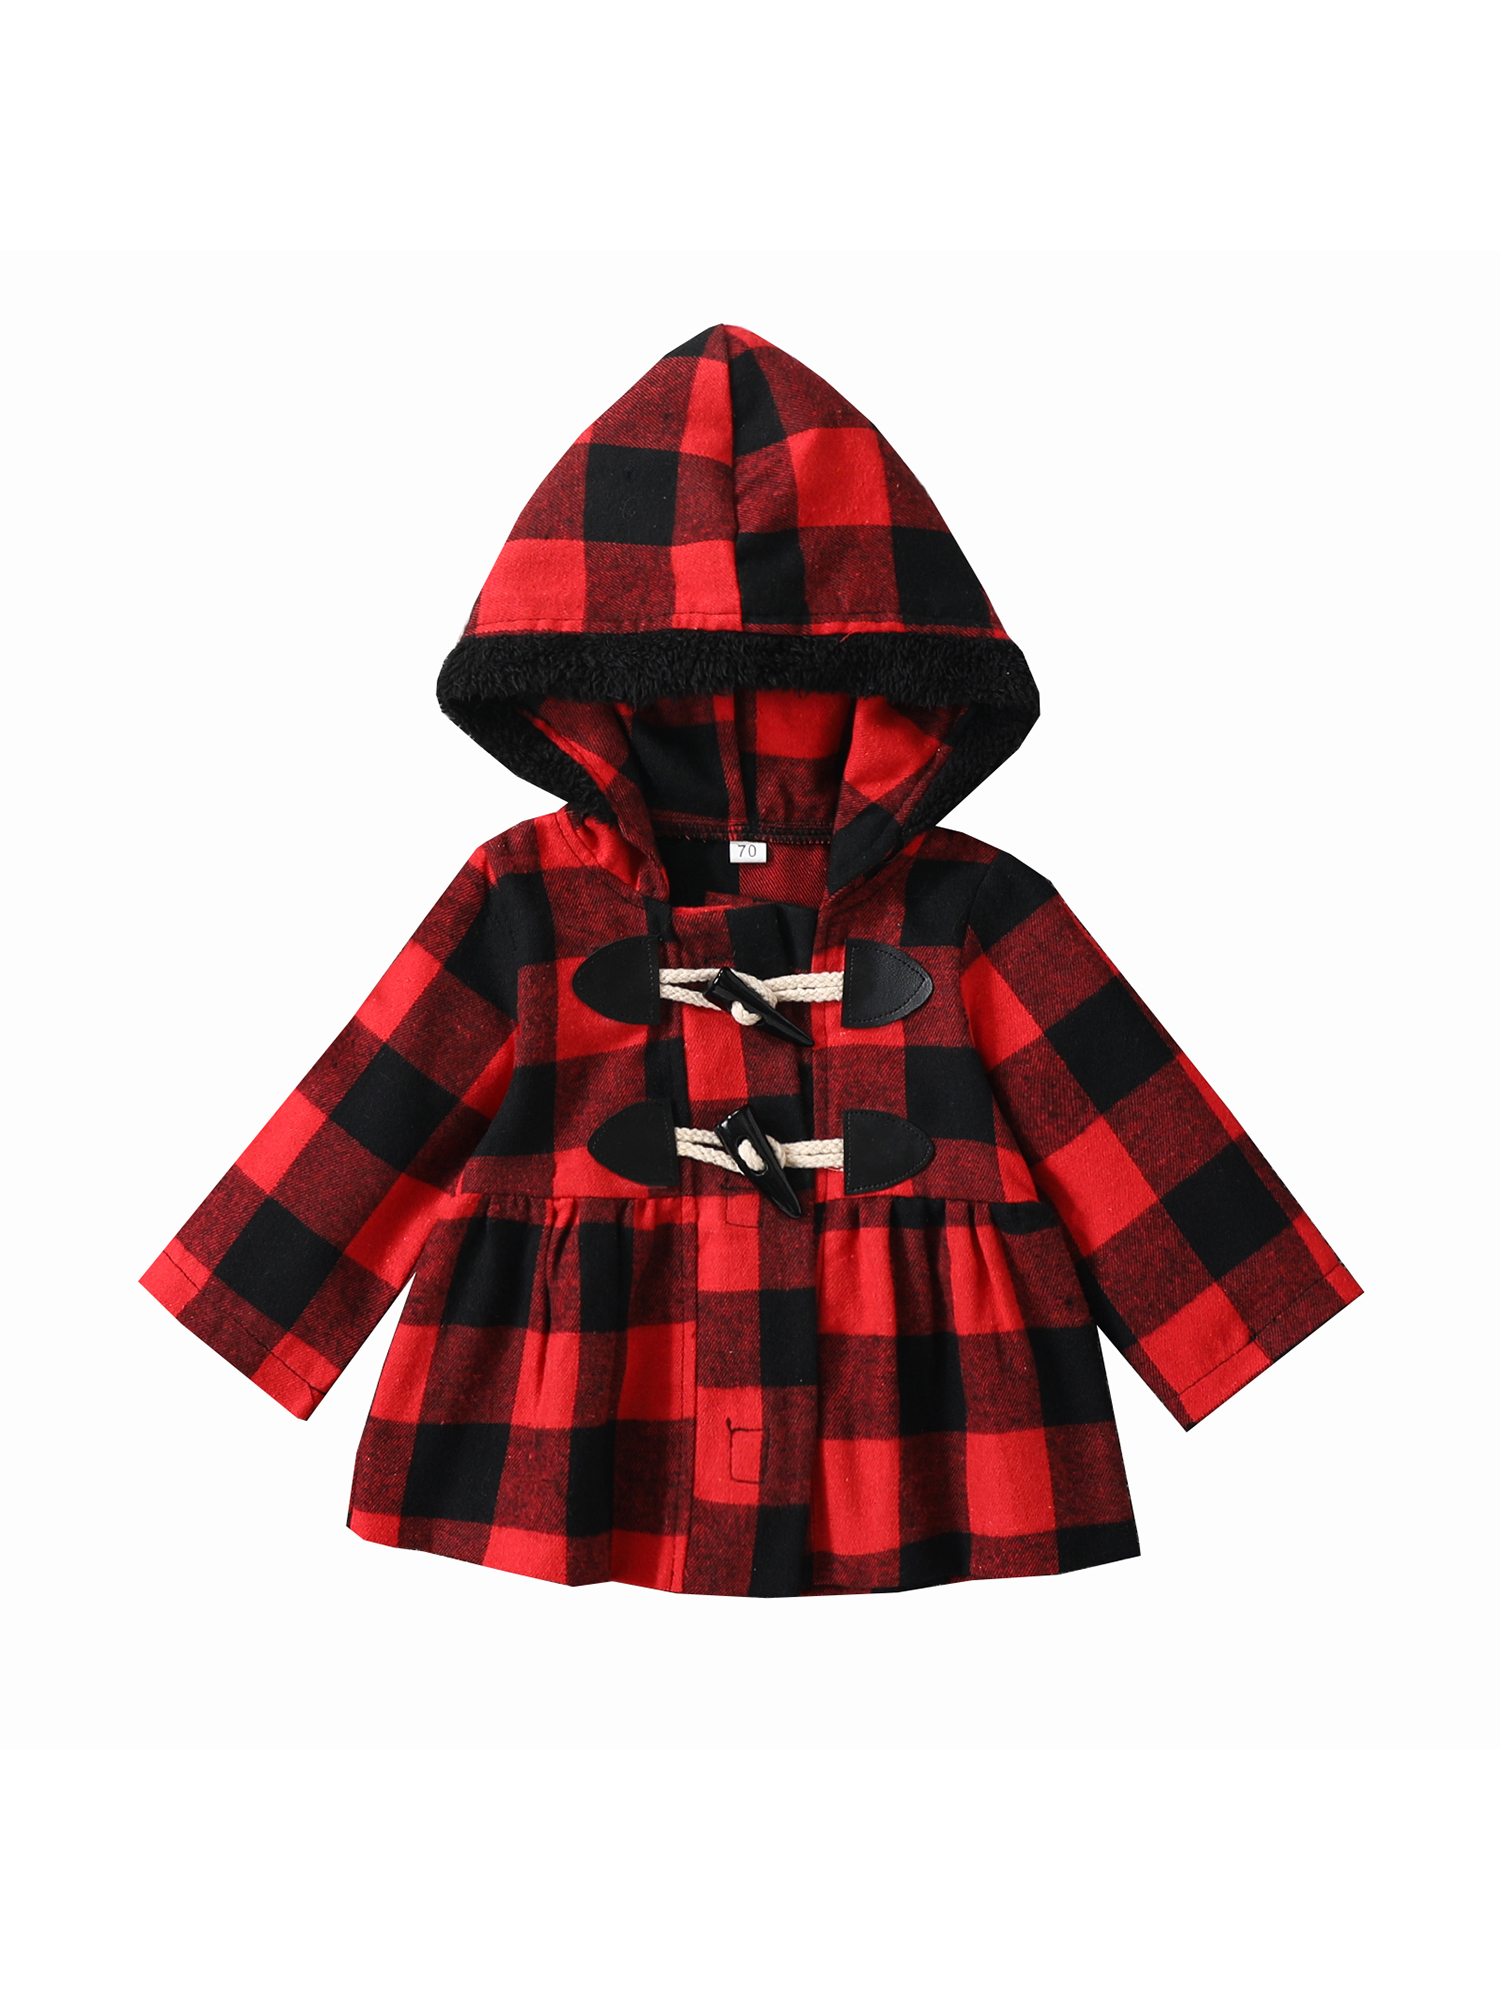 Gwiyeopda Toddler Baby Girls Hooded Coat Plaid Print Long Sleeves Horn Button Closure Autumn Winter A-Line Jacket - image 1 of 6